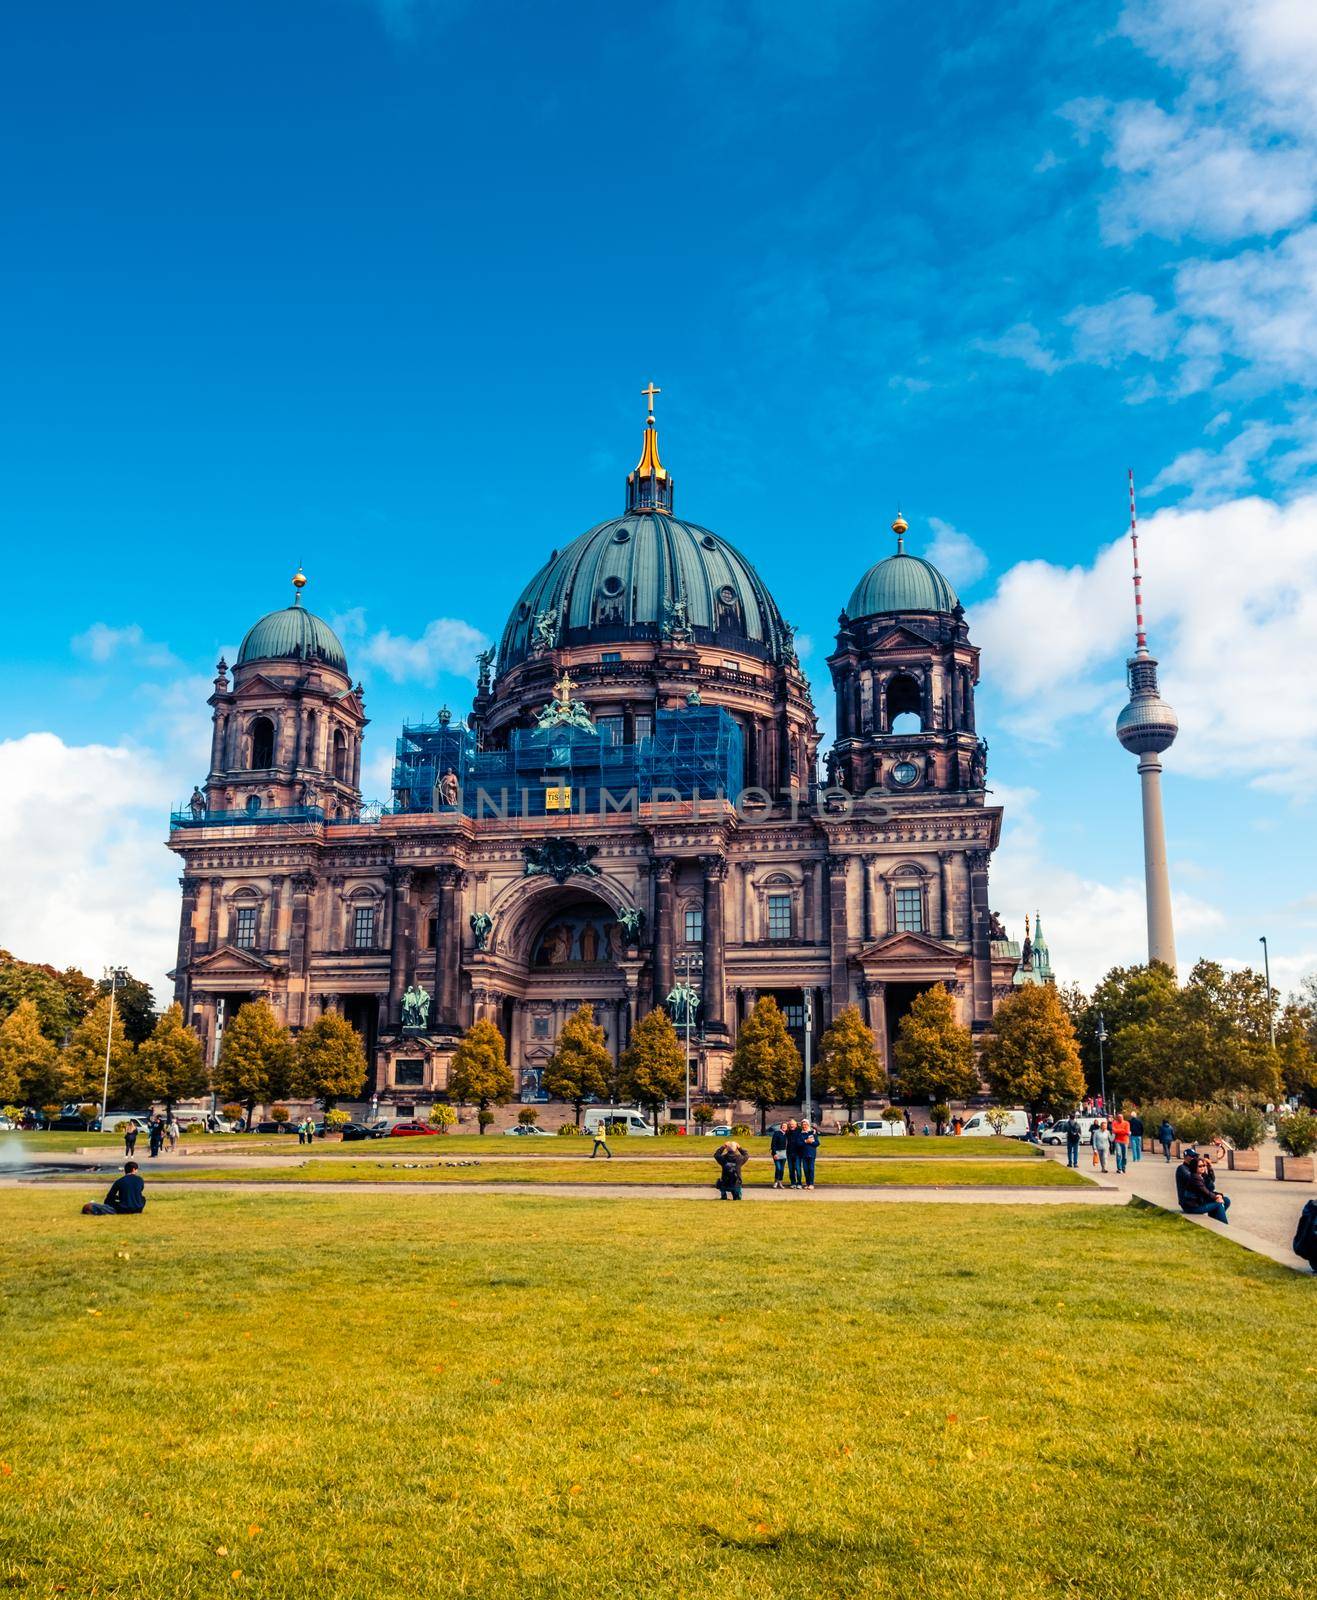 Berlin, Germany - 19 September 2019: Majestic Berlin Cathedral under clear blue sky in Germany